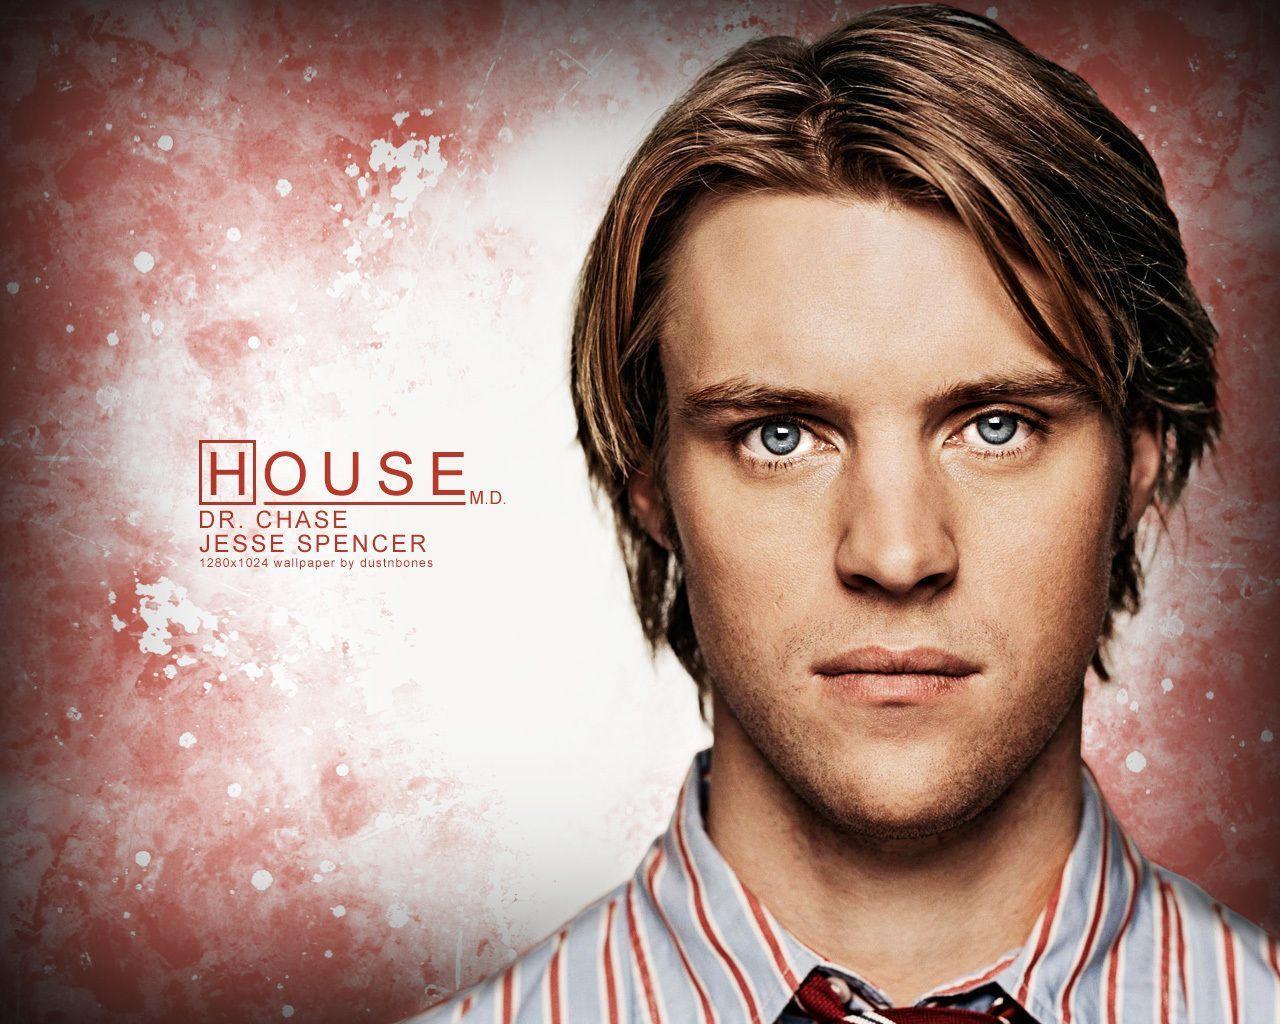 House M.D.: Dr. Chase / Good